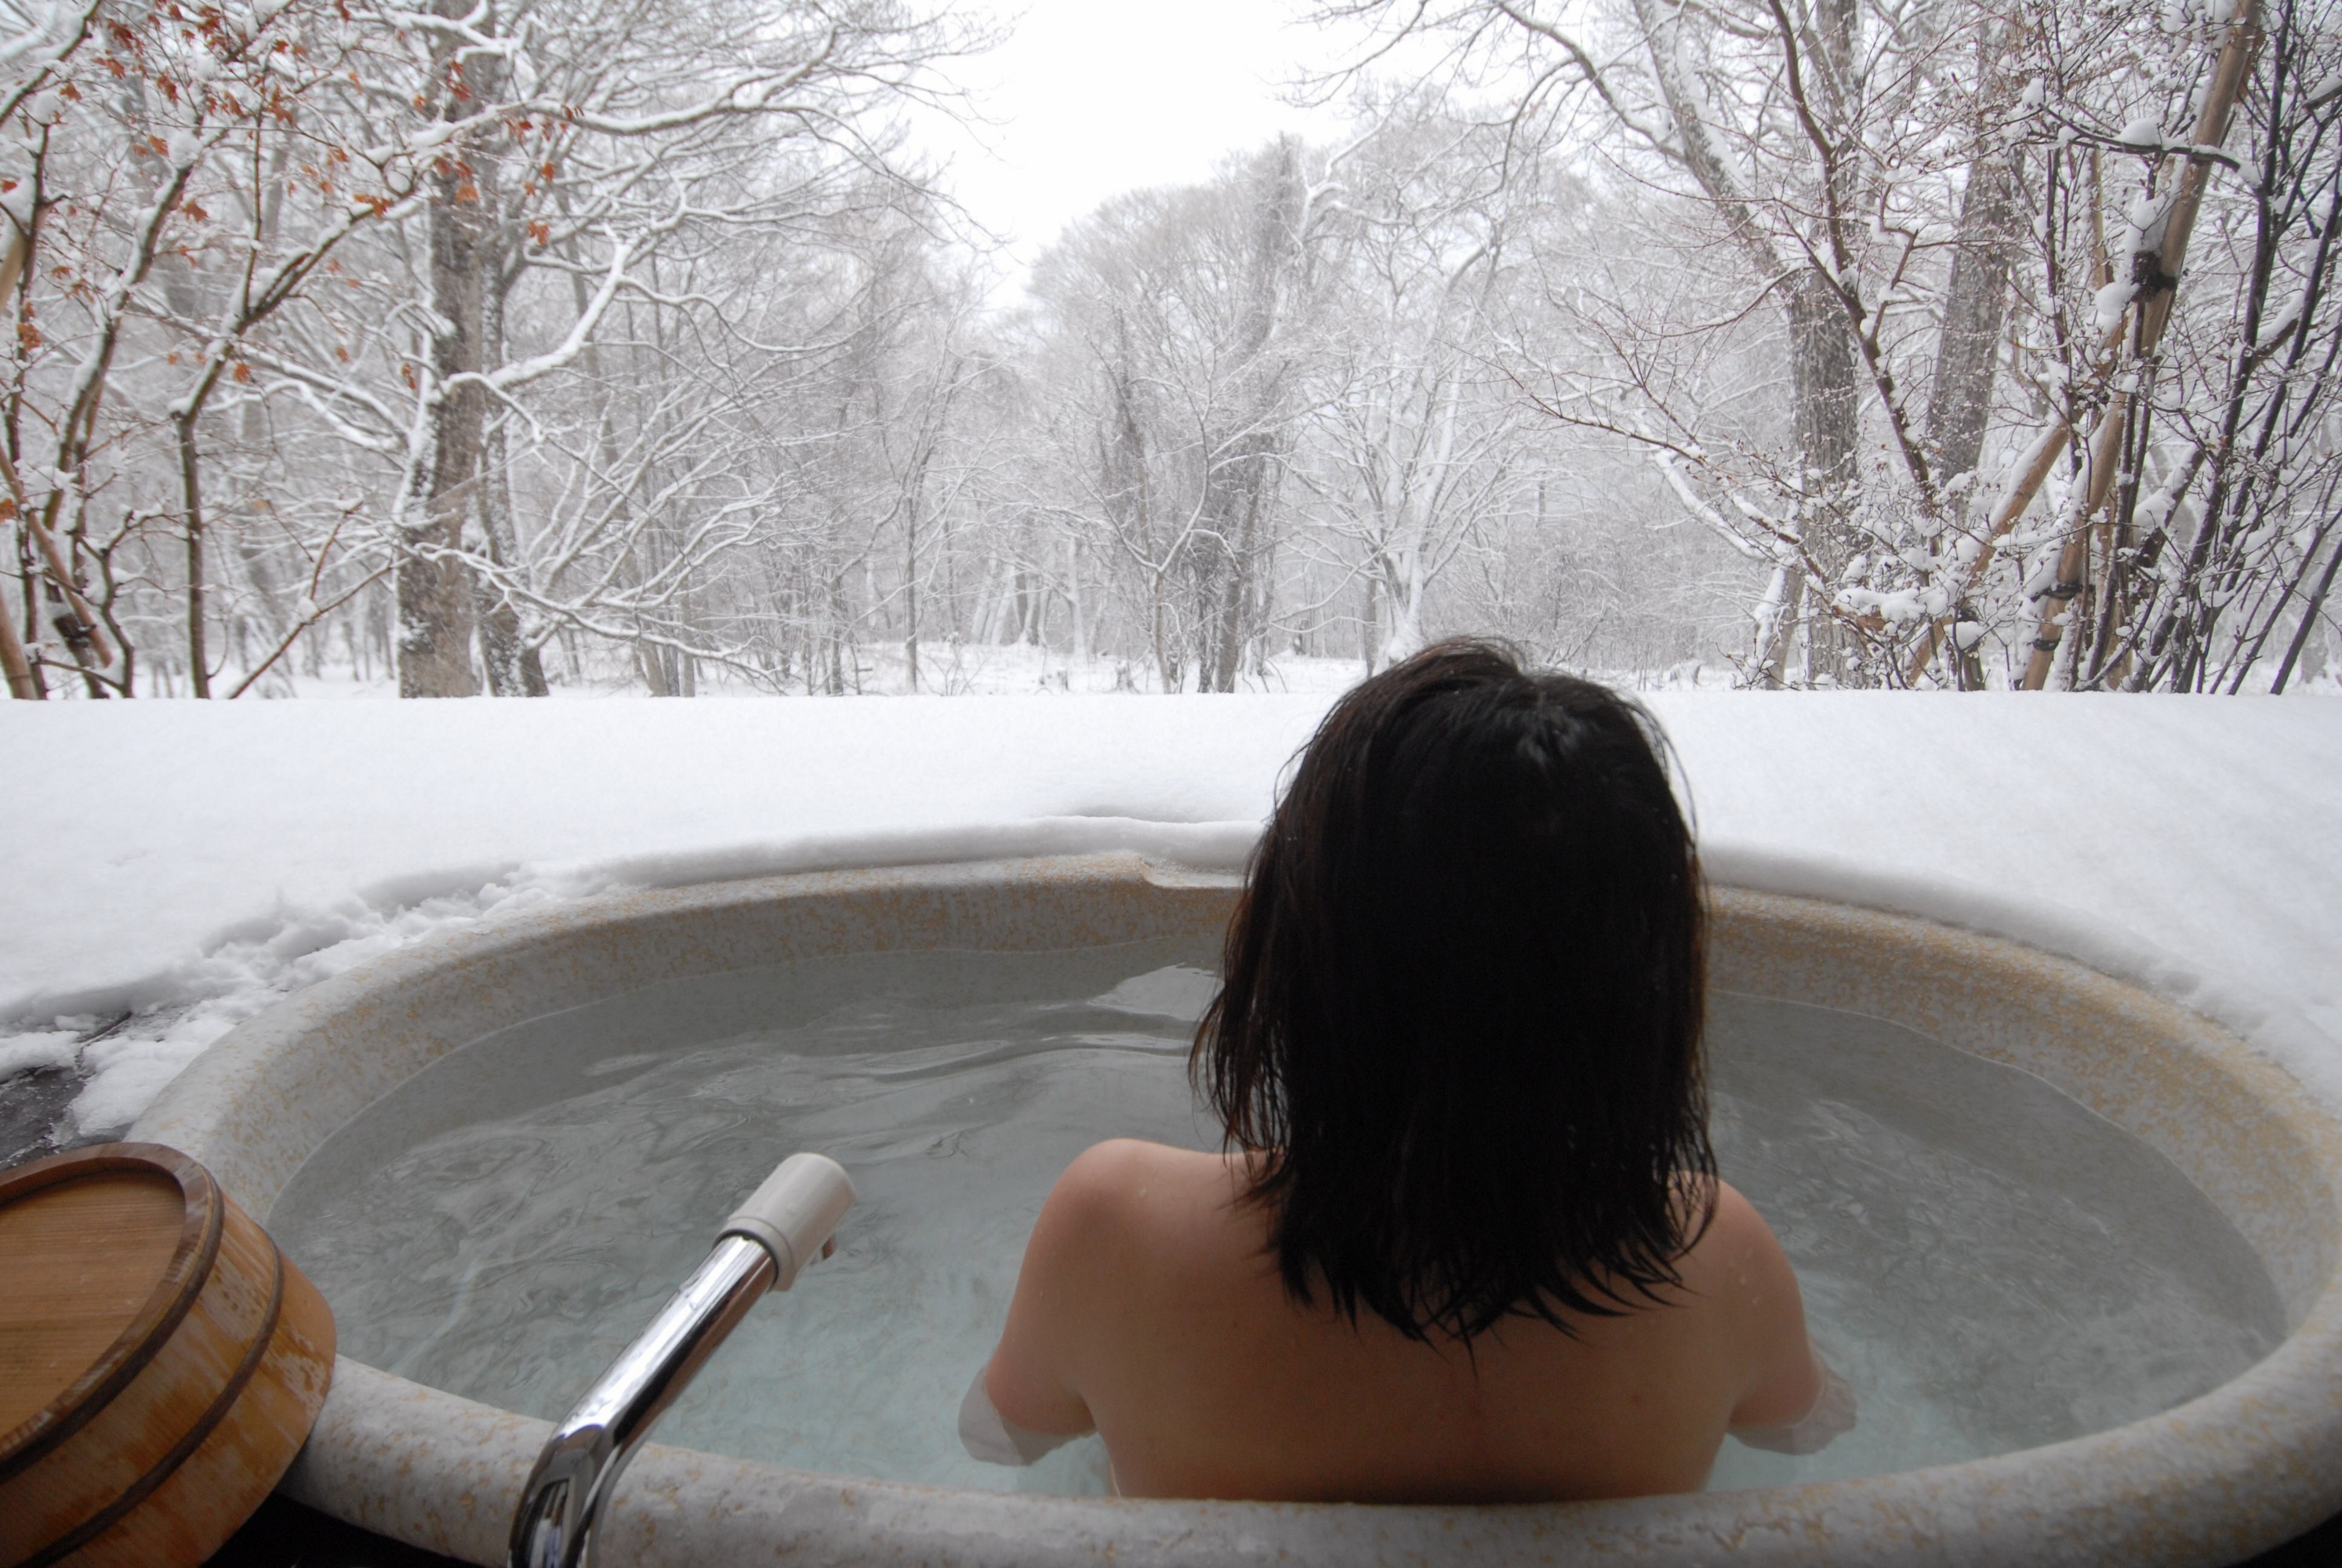 young Japanese woman in a hot open air bath while snowing